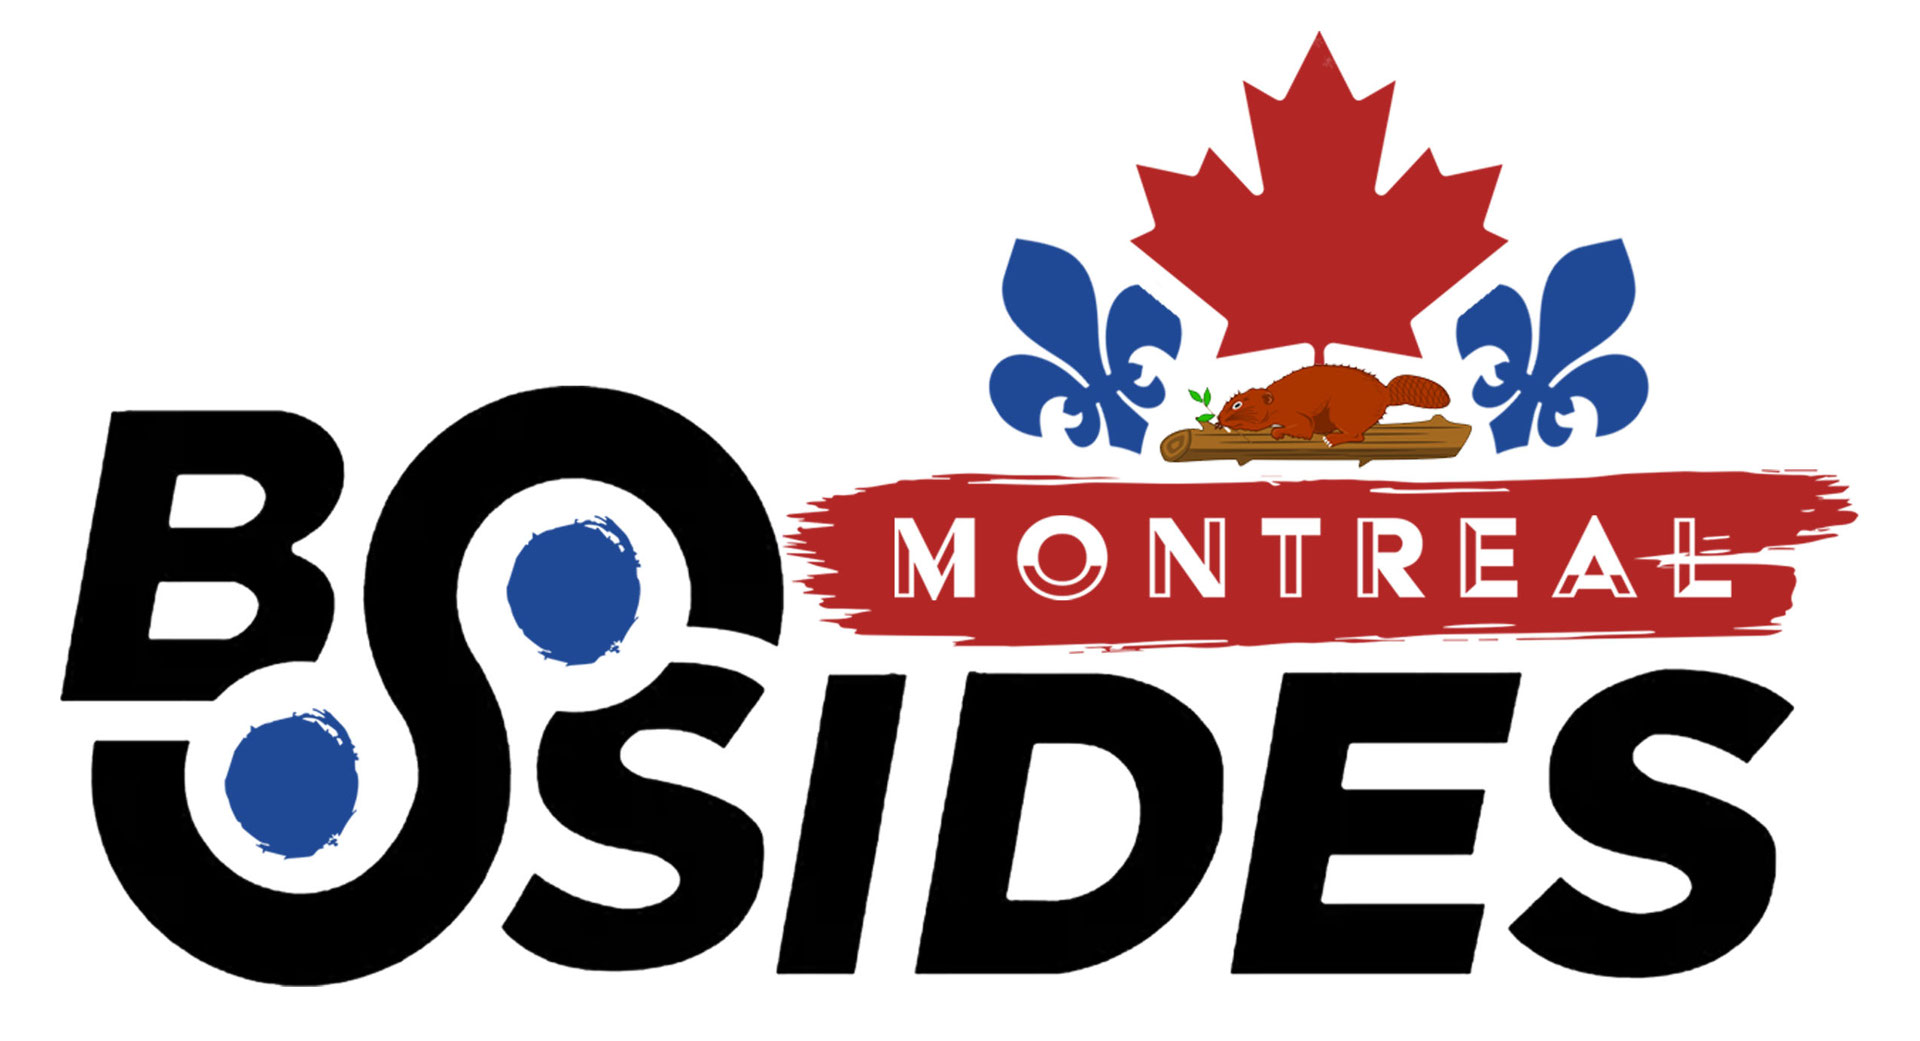 Security BSides Montreal